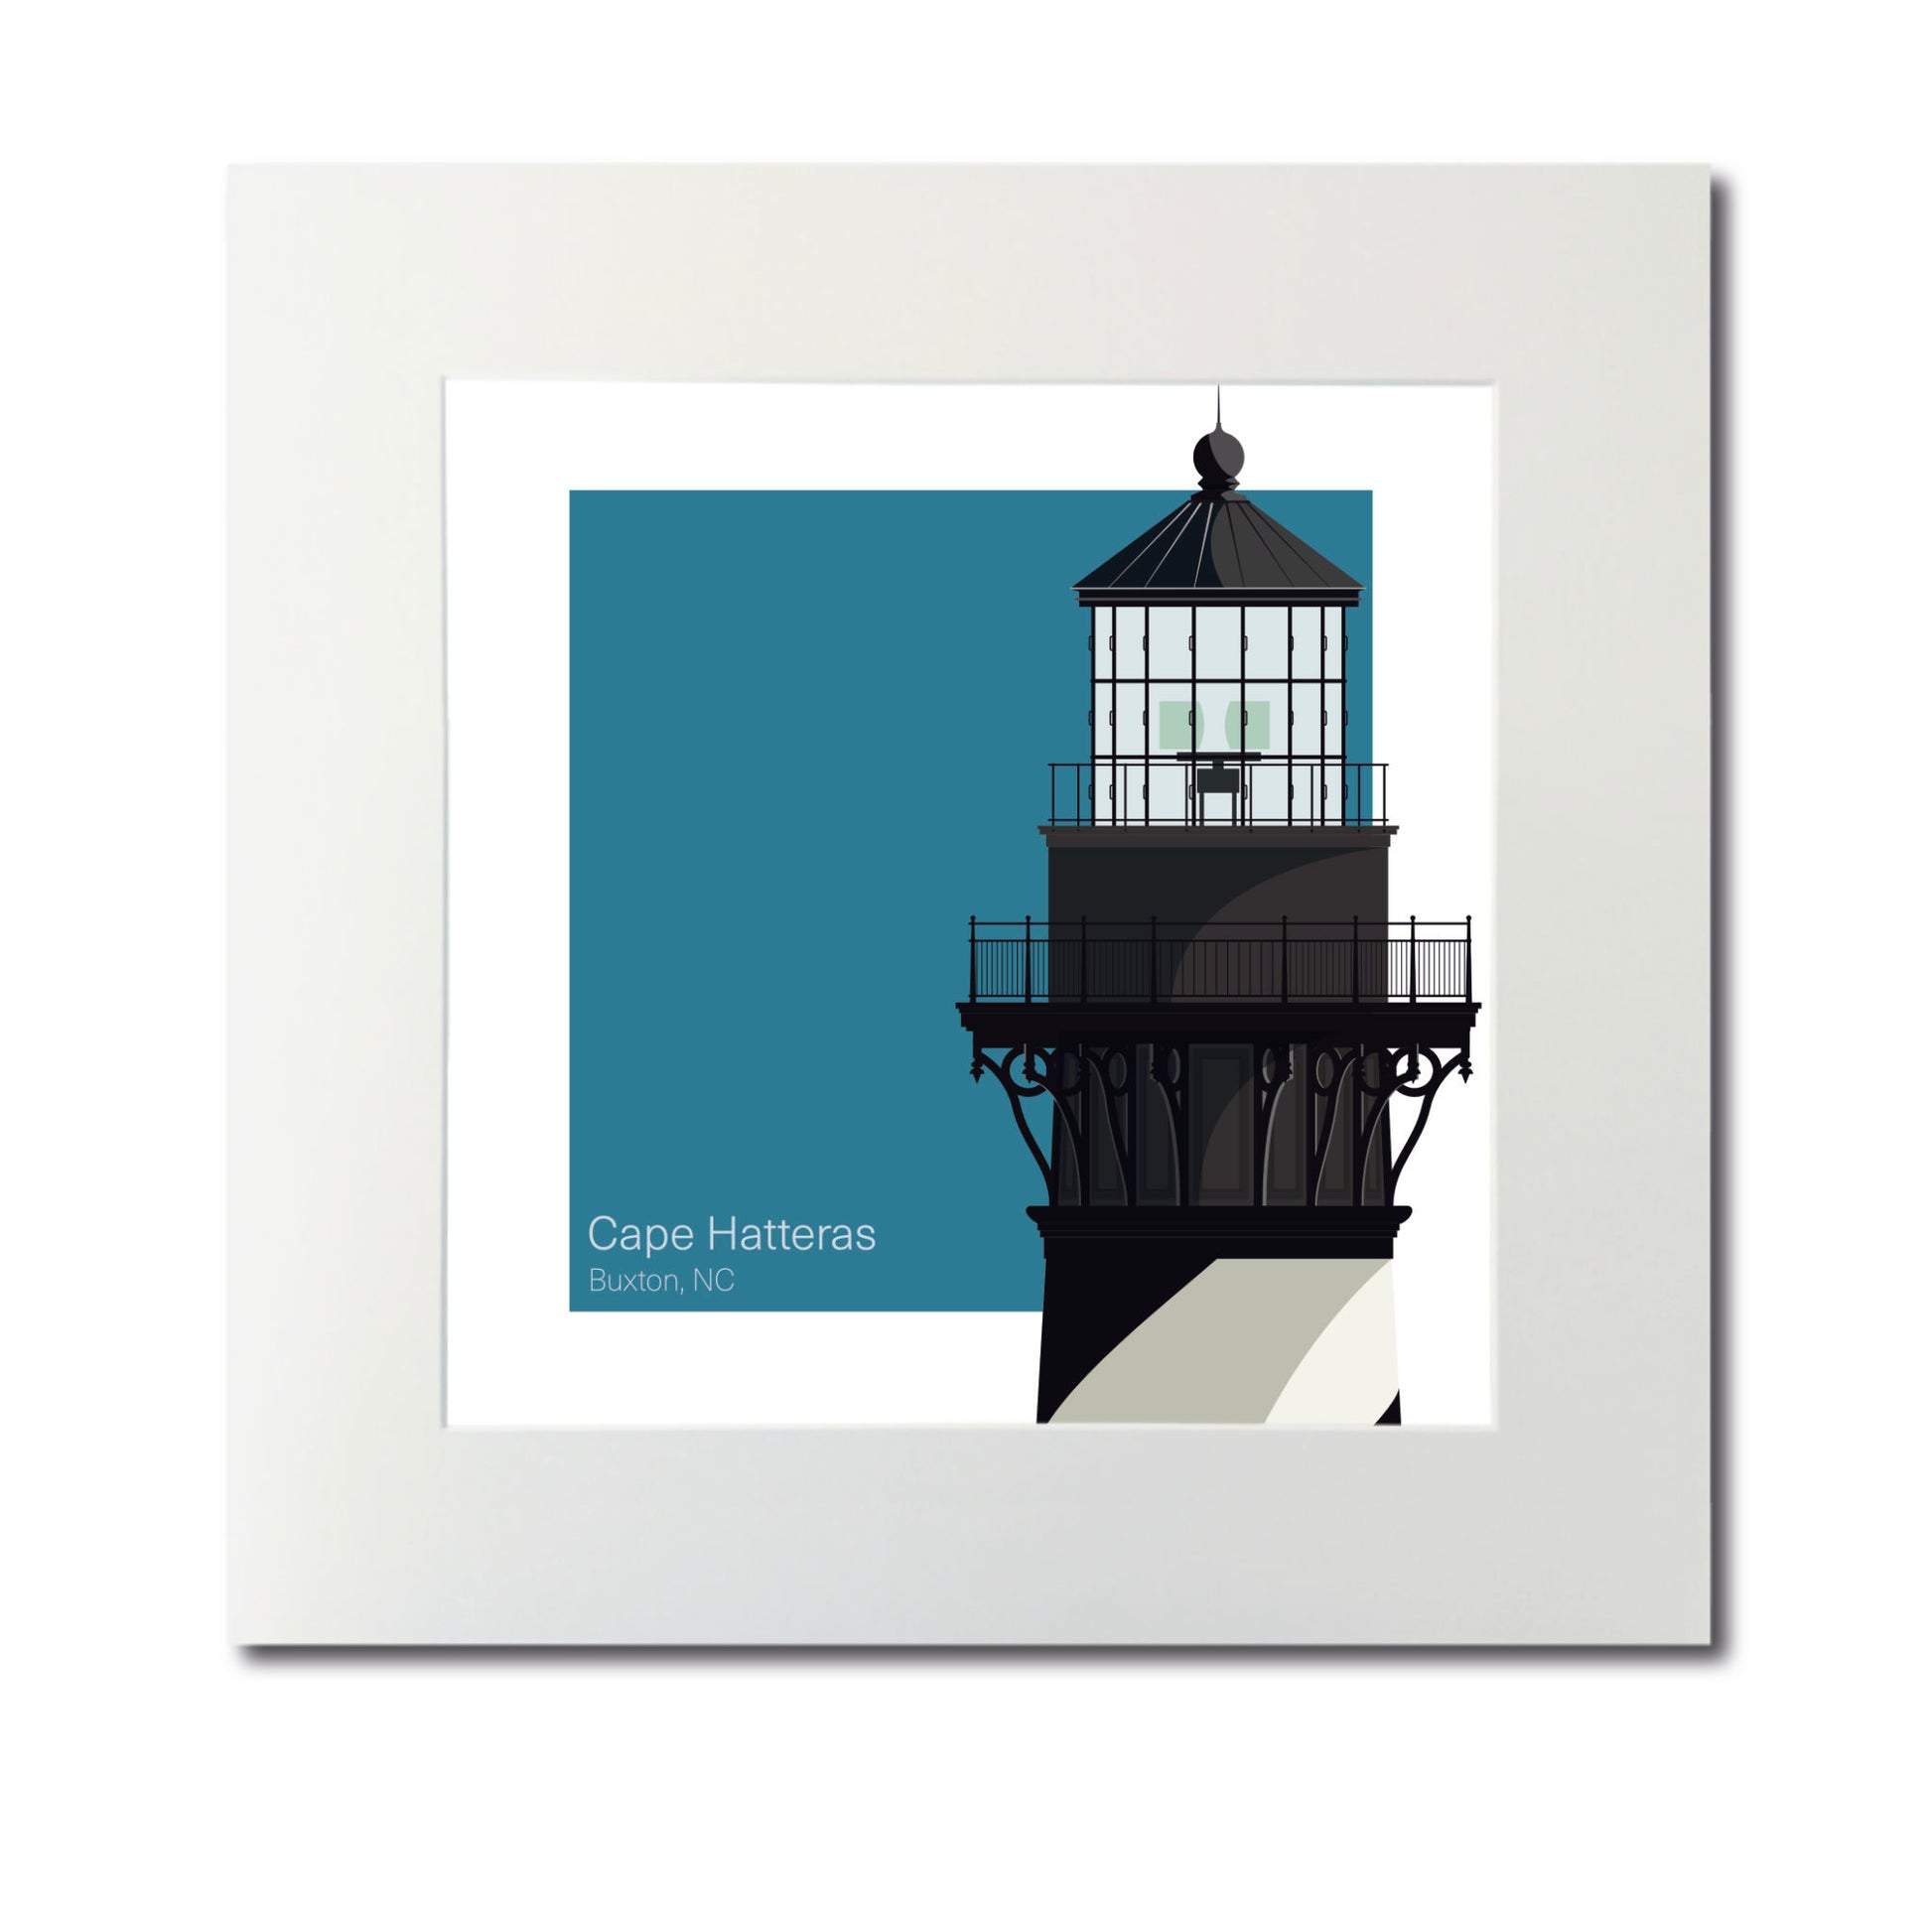 Illustration of the Cape Hatteras lighthouse, NC, USA. On a white background with aqua blue square as a backdrop., in a white frame  and measuring 12"x12" (30x30cm).